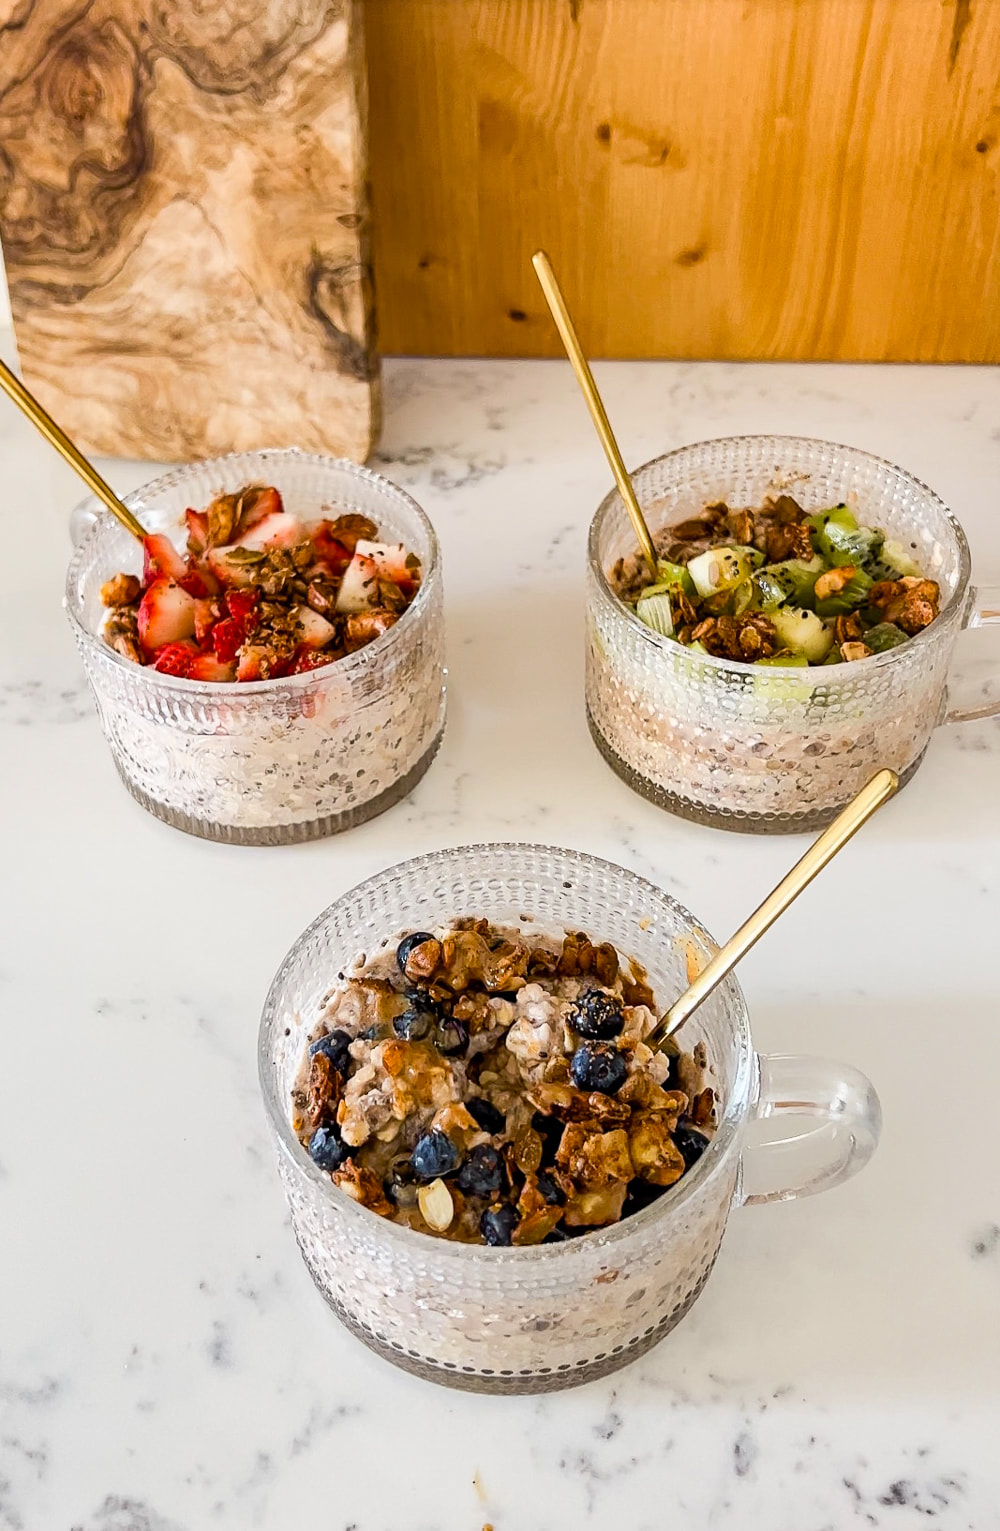 These Overnight Oat Meal Prep Bowls Make Clean Eating Mornings a